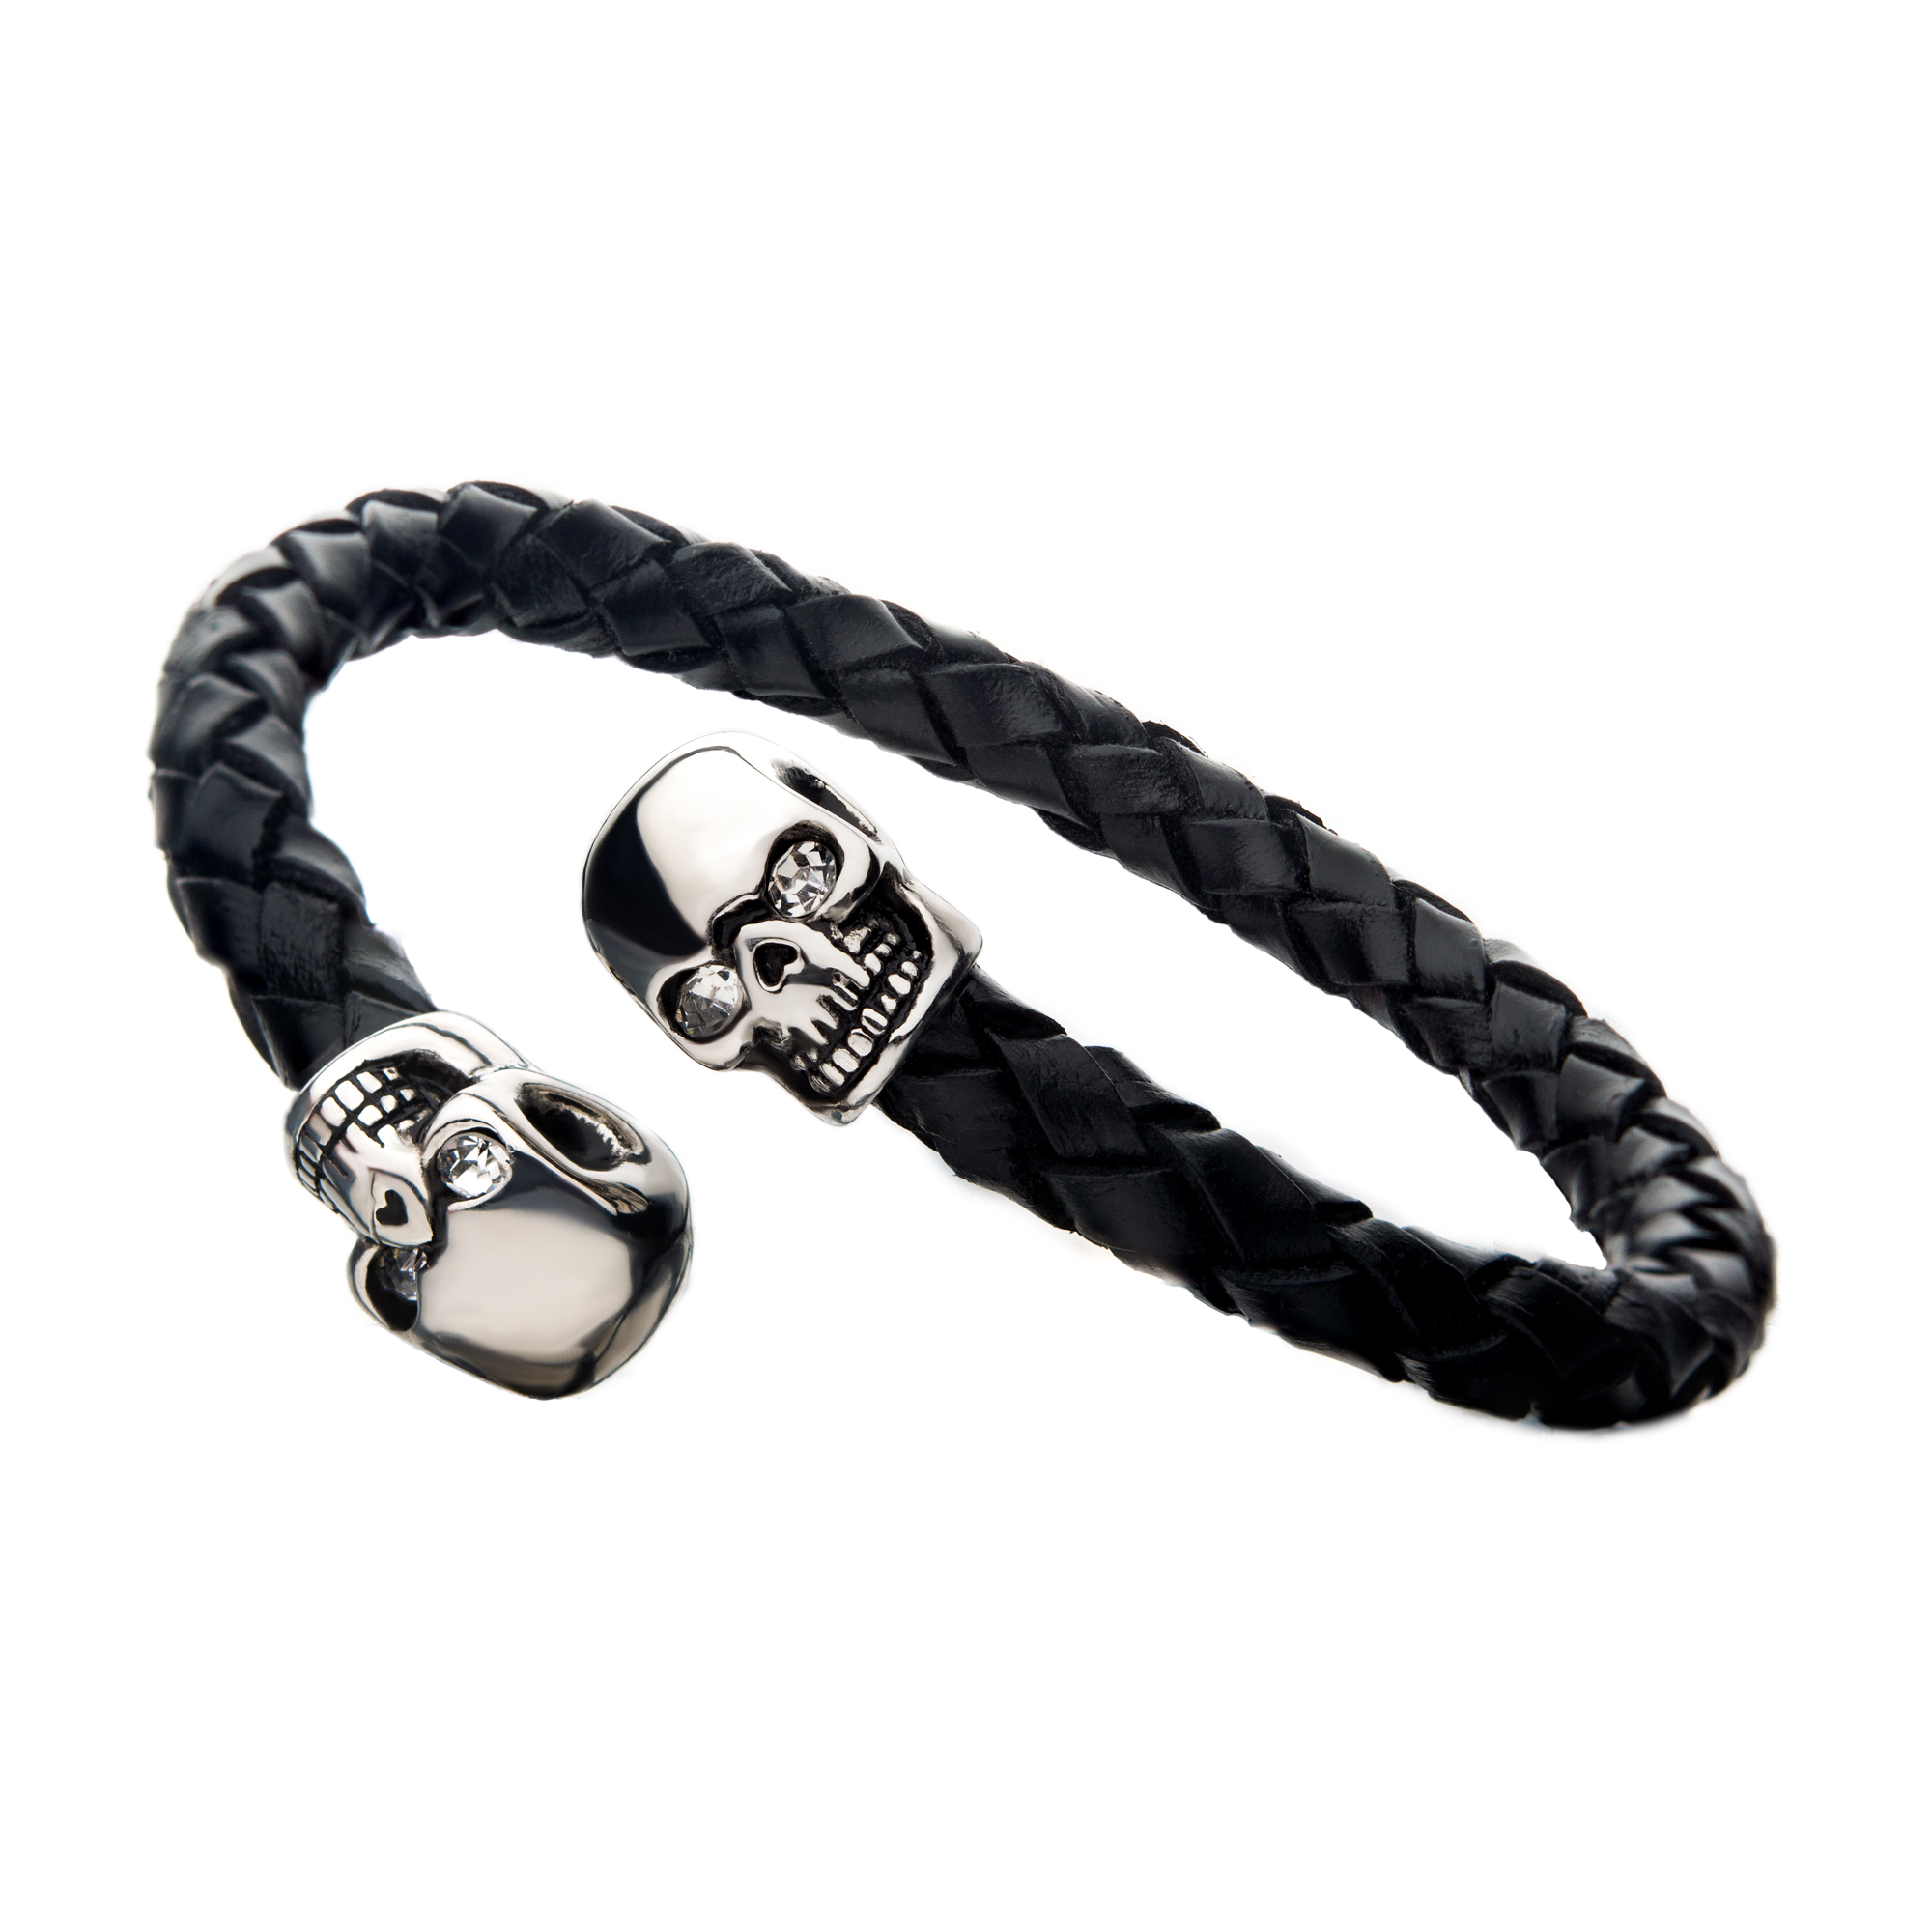 Skull Ends Cuff Leather Bracelet Image 2 Enchanted Jewelry Plainfield, CT